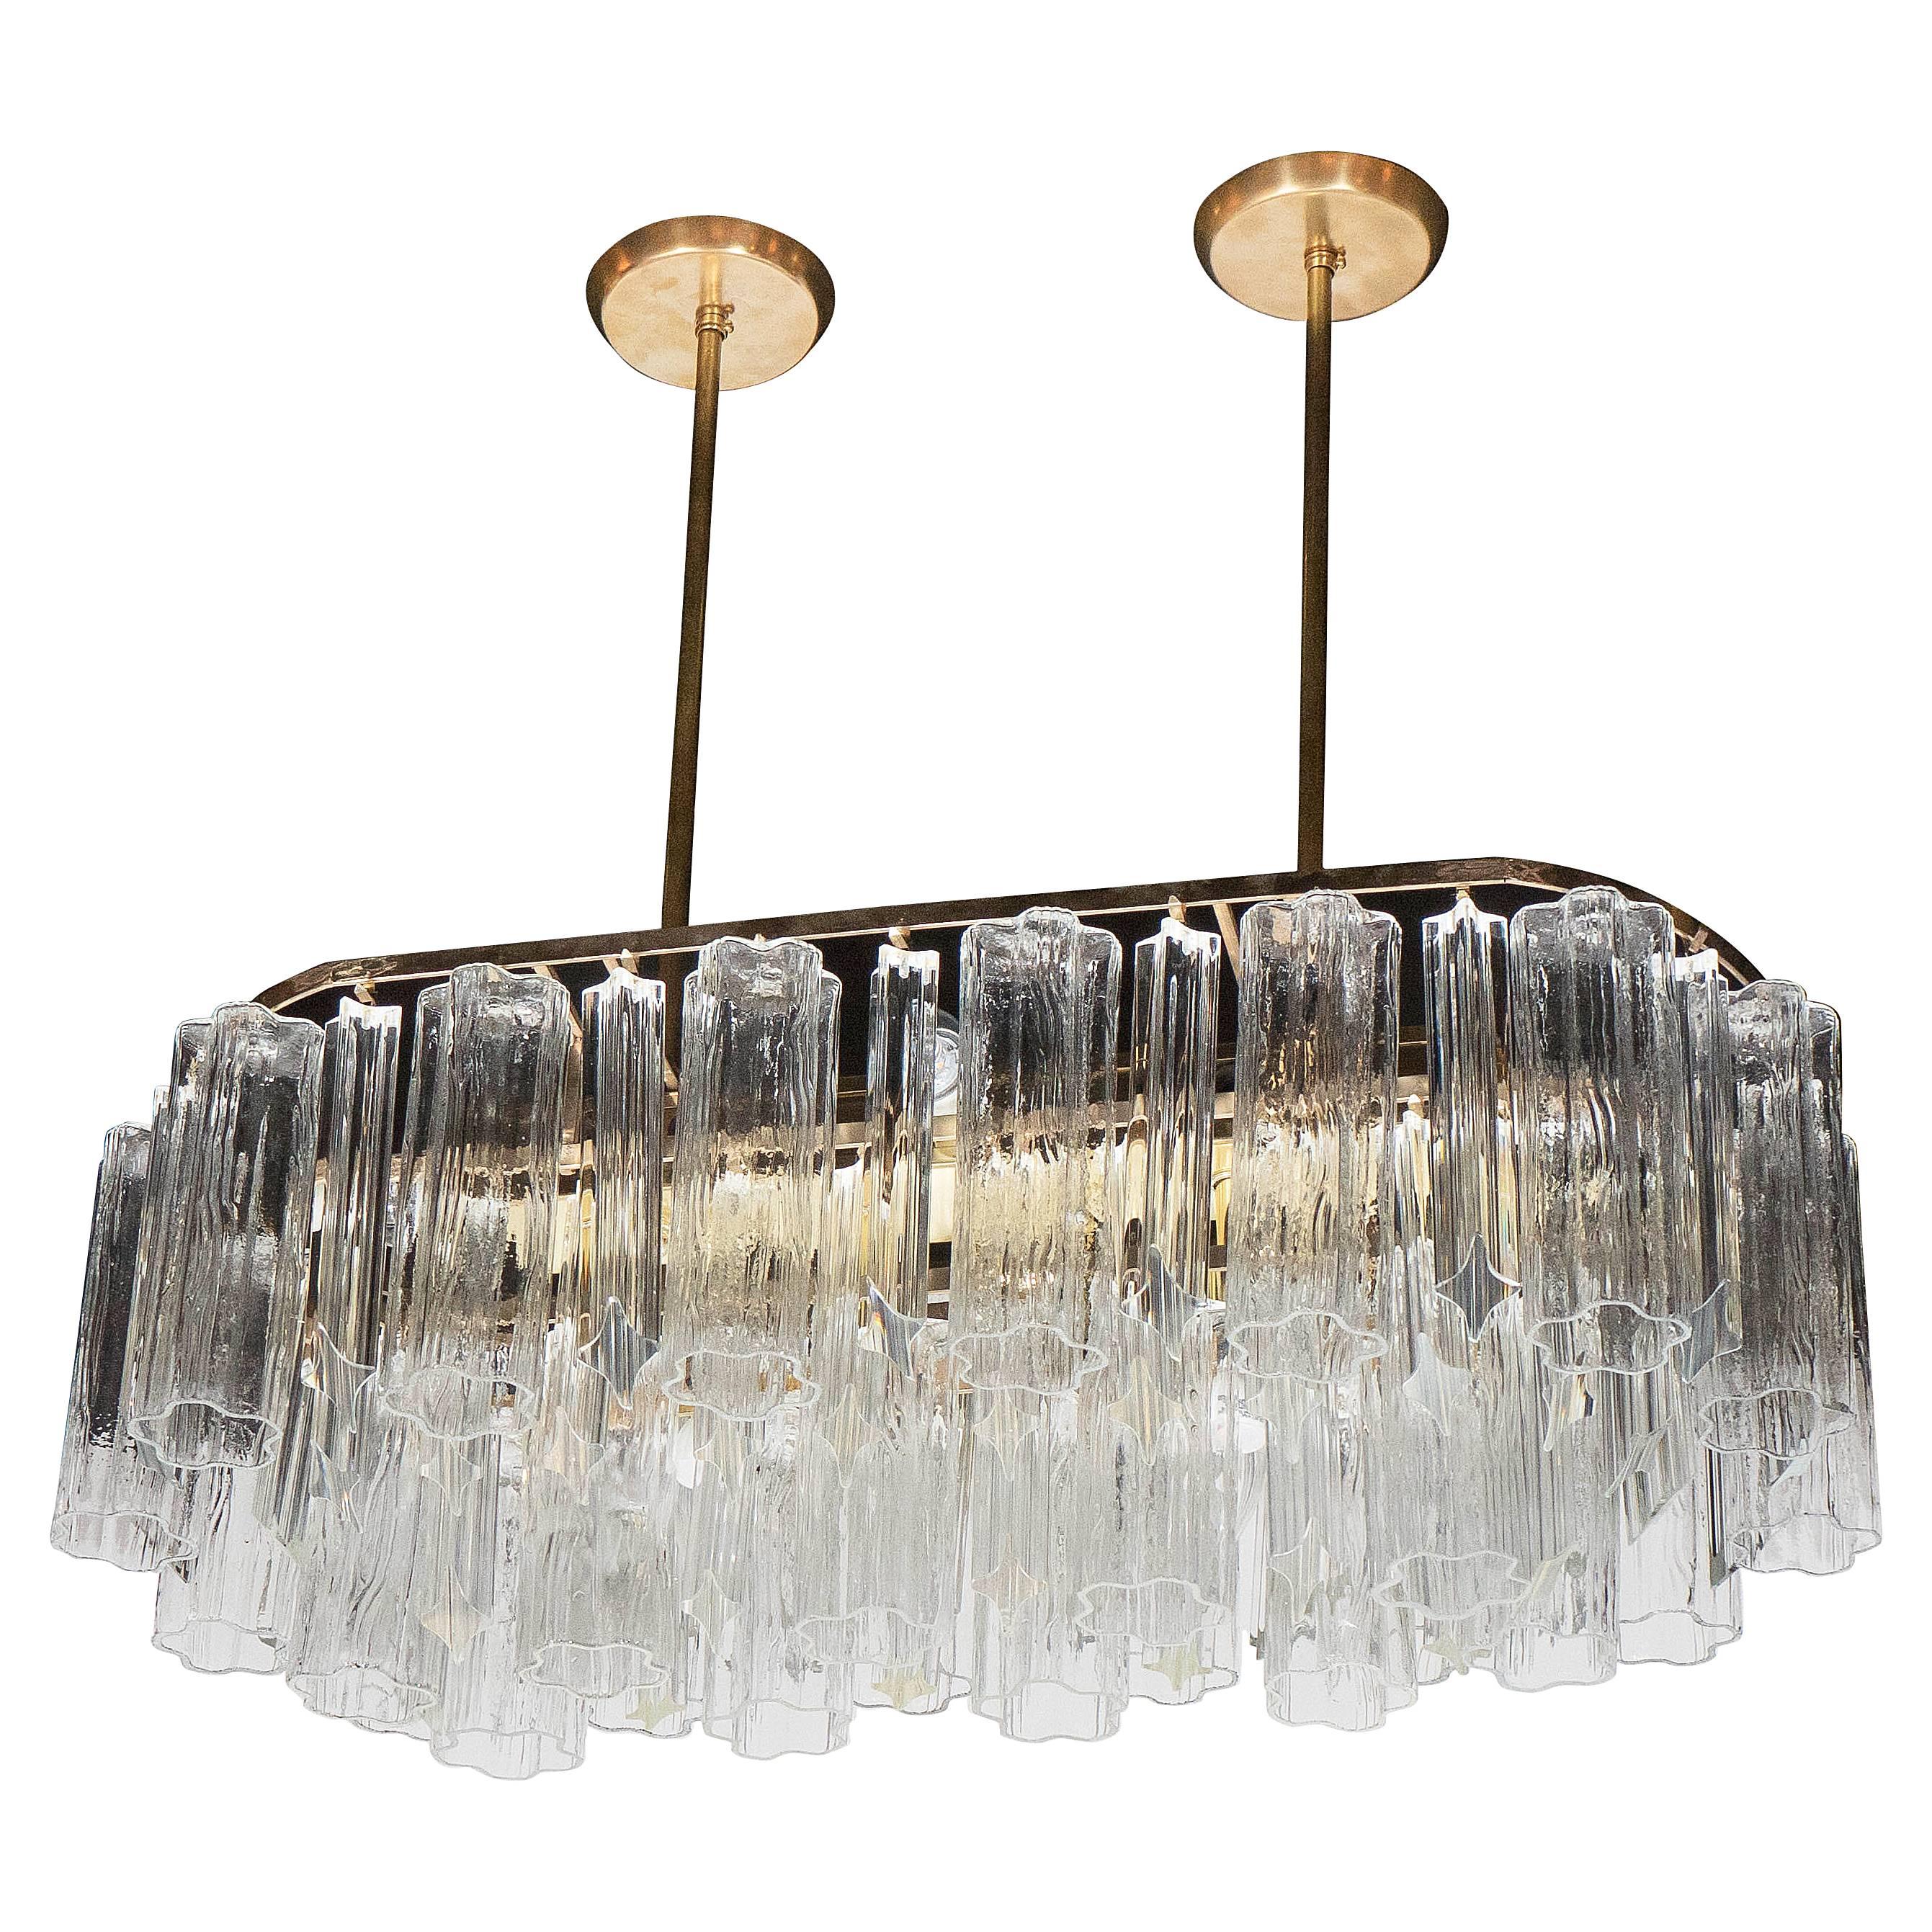 Mid-Century Modern Tronchi and Triedre Murano Chandelier by Camer